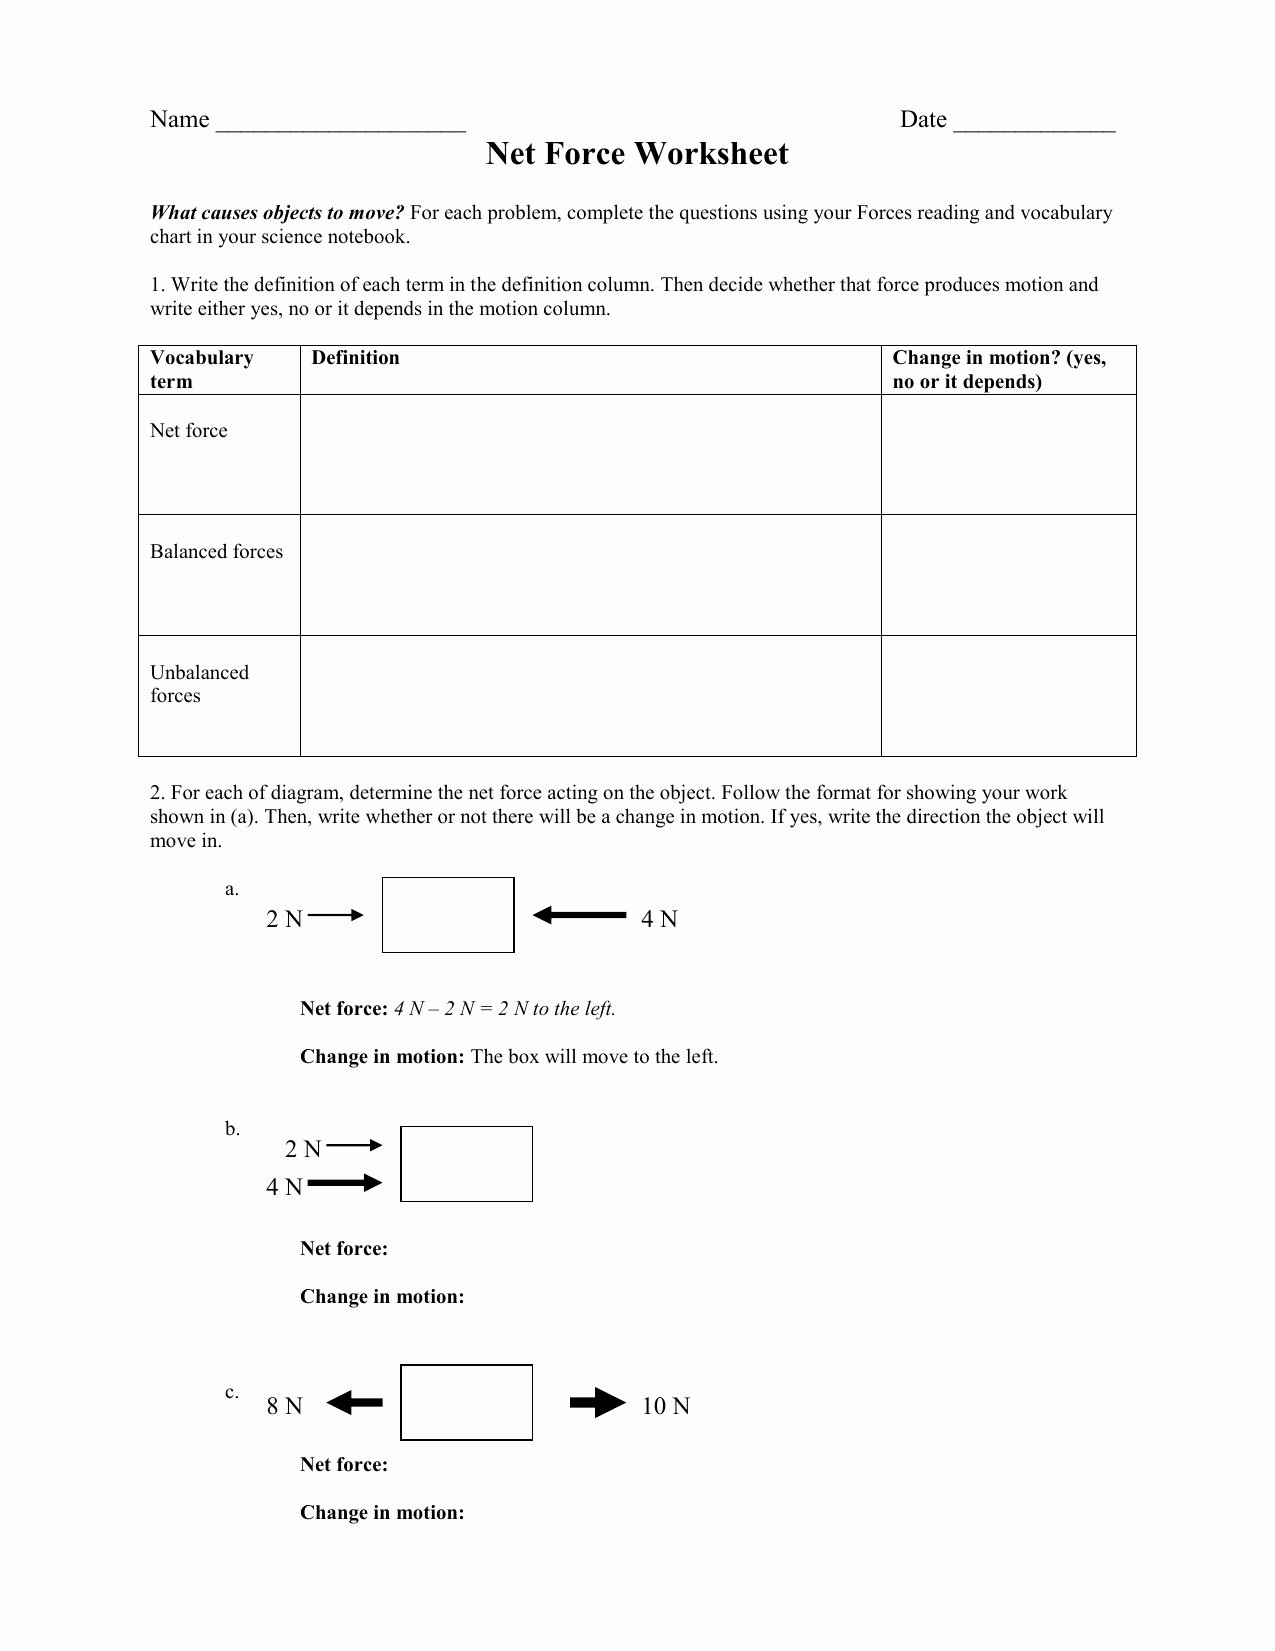 Net force Worksheet Answers New Net force Worksheet Answers – Db Excel